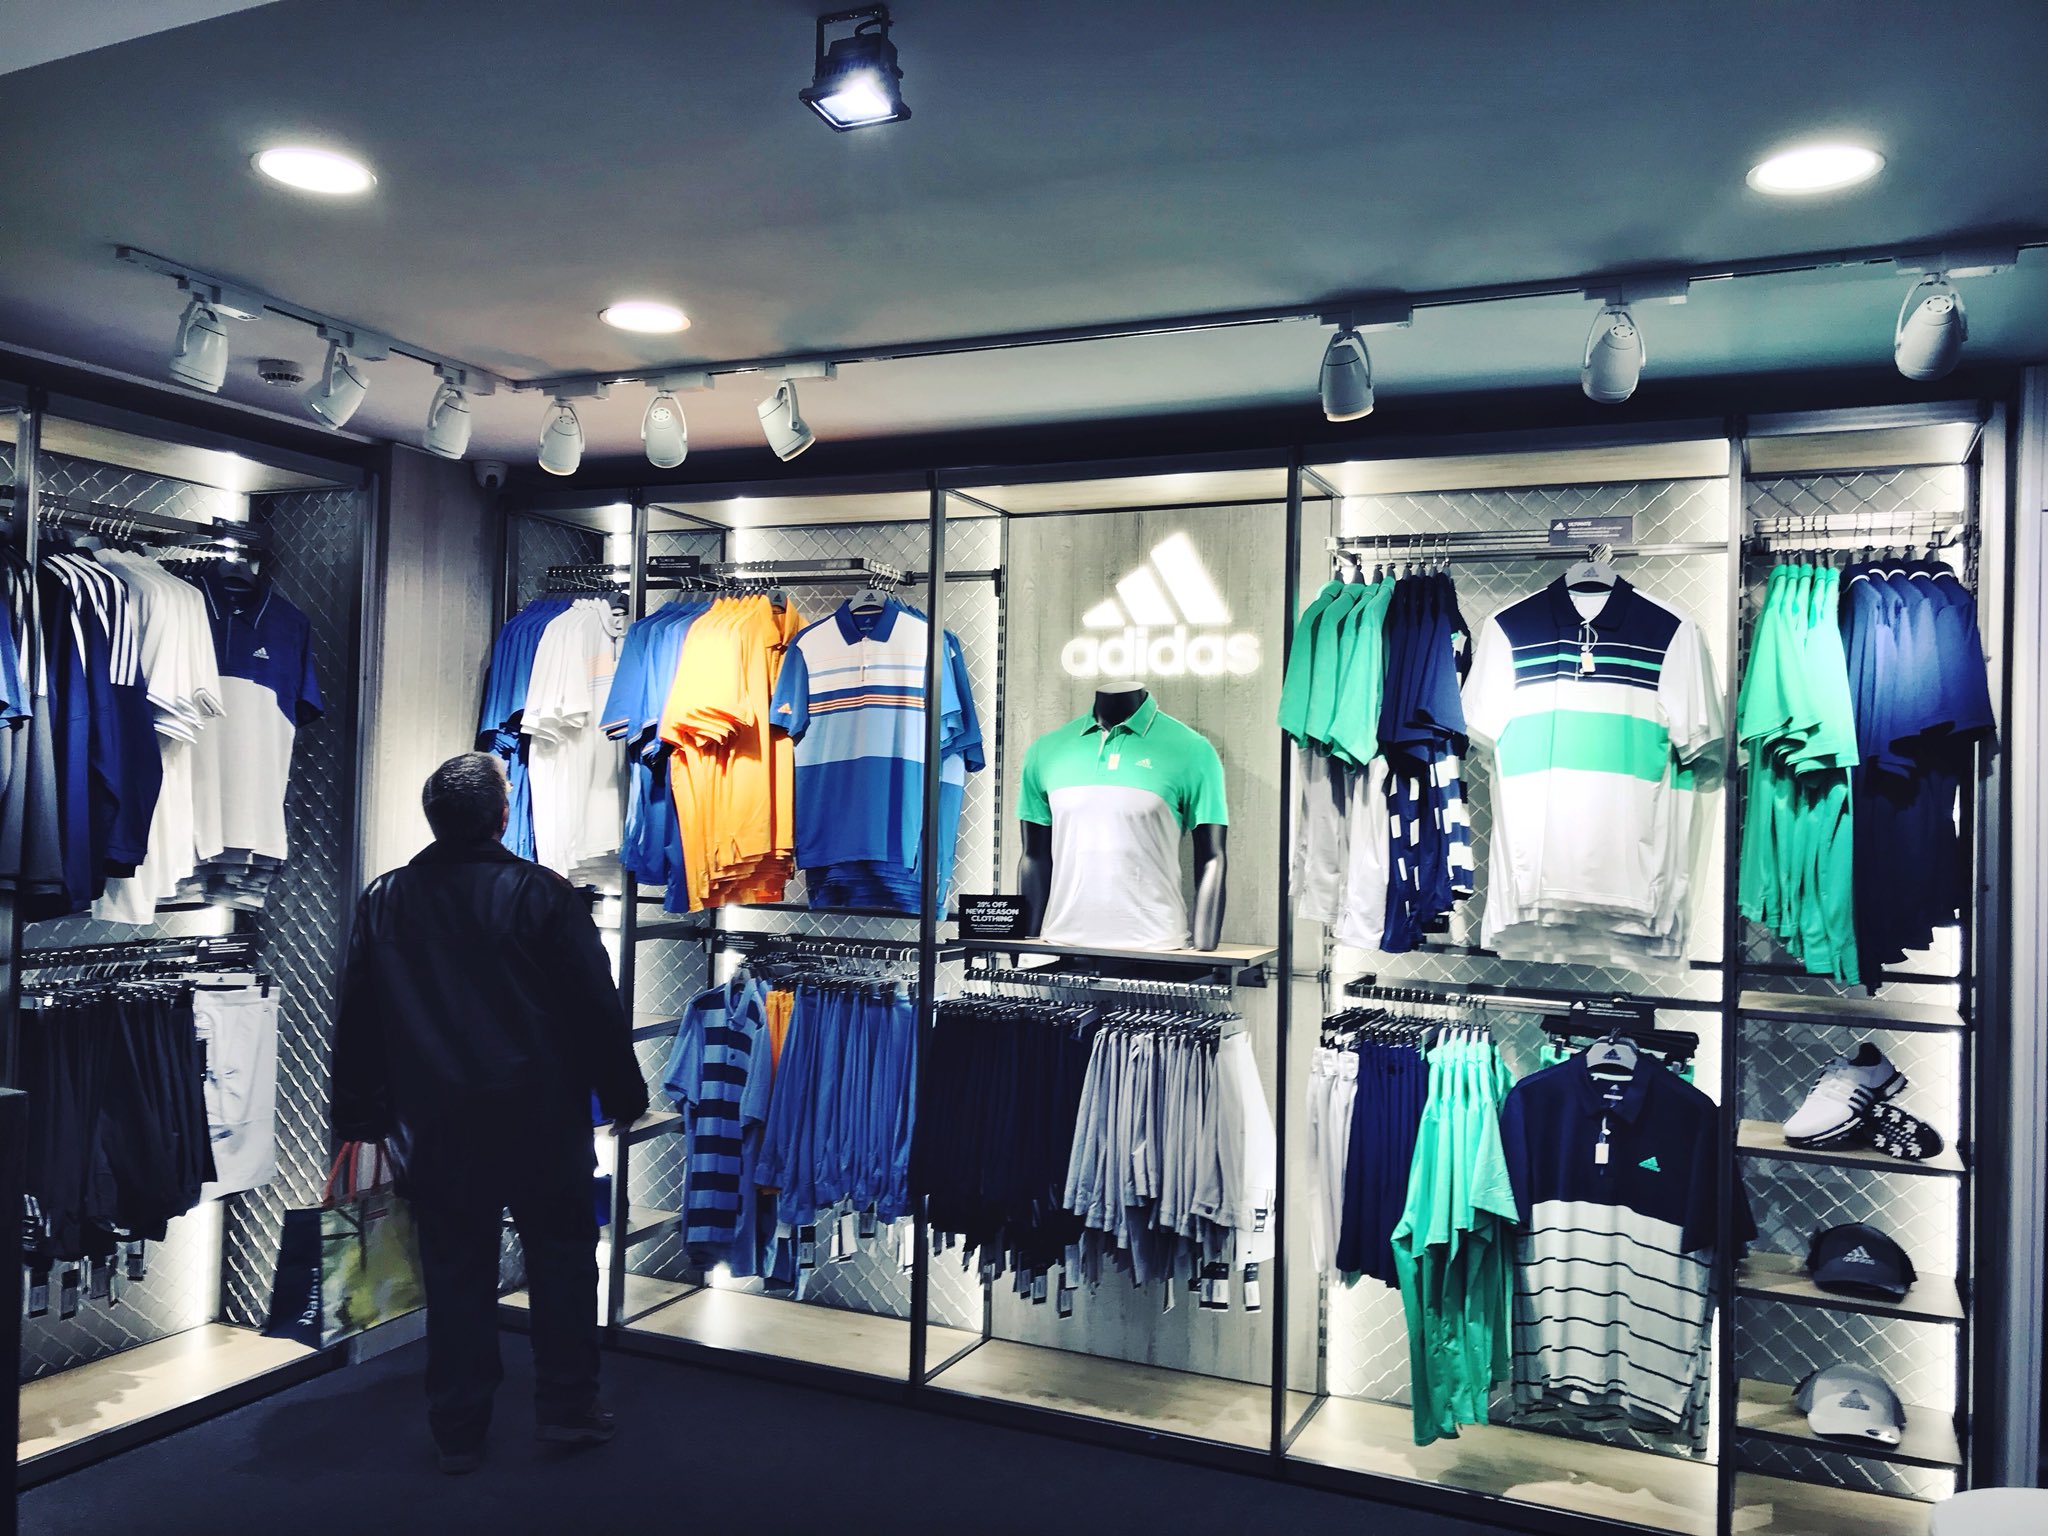 Silvermere Golf on Twitter: "The finished article. @adidasGolf shop-in-shop complete + with looks from the year's first major. https://t.co/sevn3laN1x" /